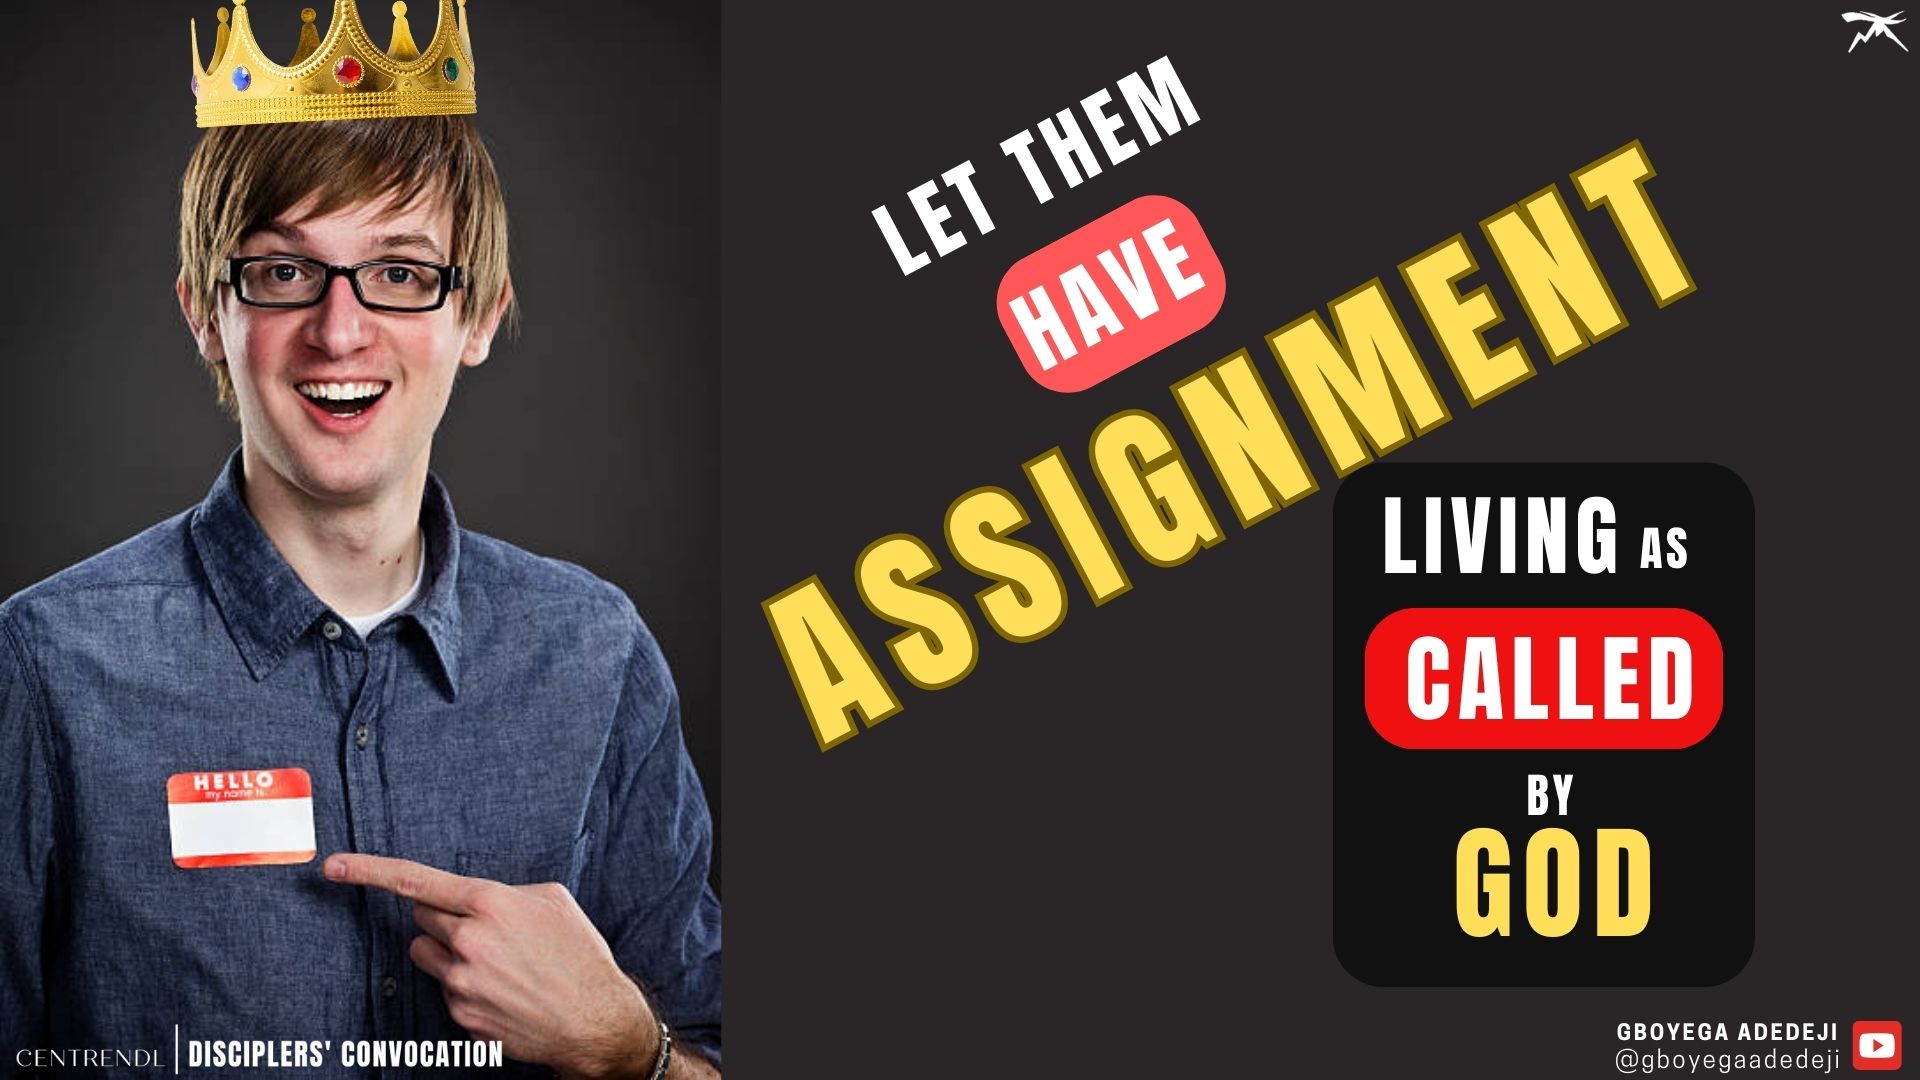 Let Them Have ASSIGNMENT: Living As Called By God